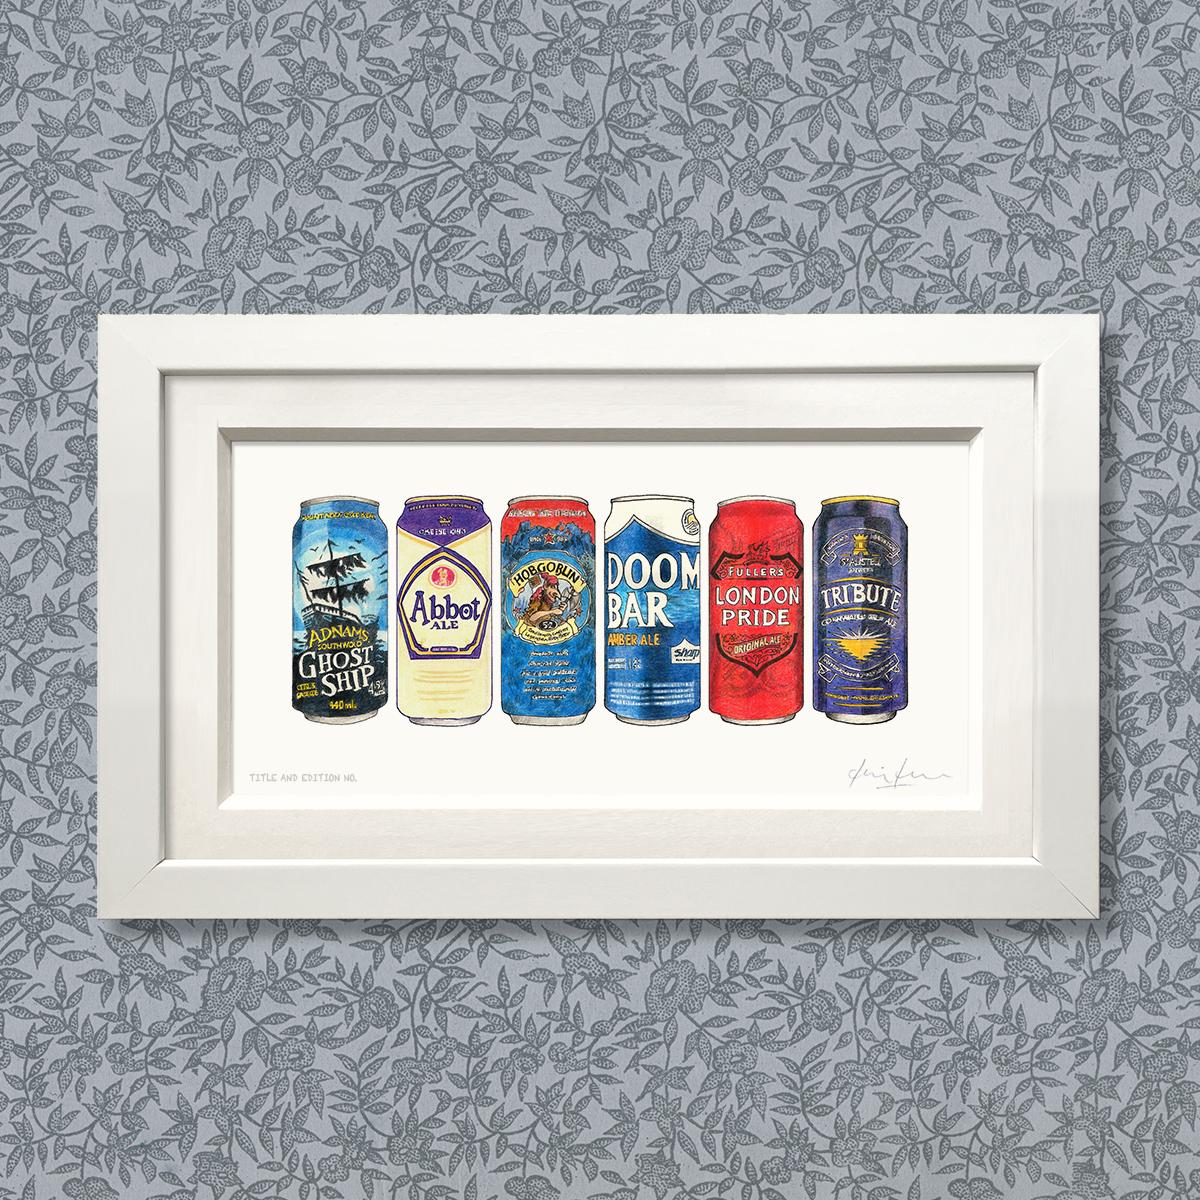 Sample Six Pack in a white frame.